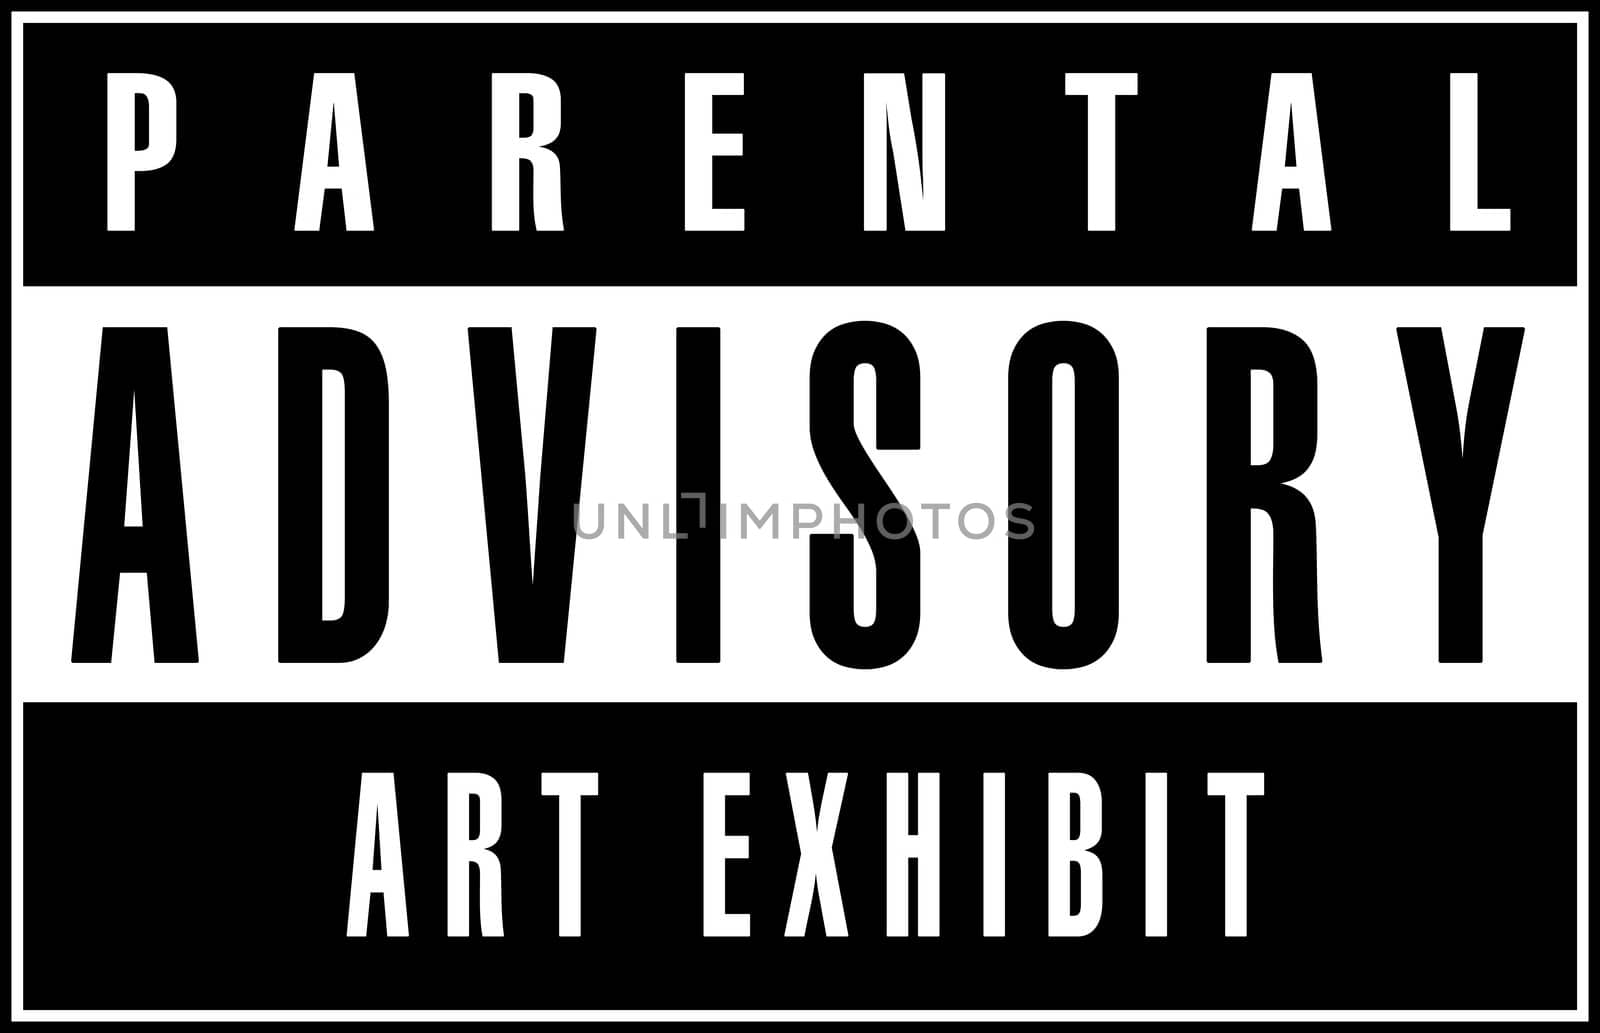 a black and white parental advisory logo. Logo is 100% created by me.